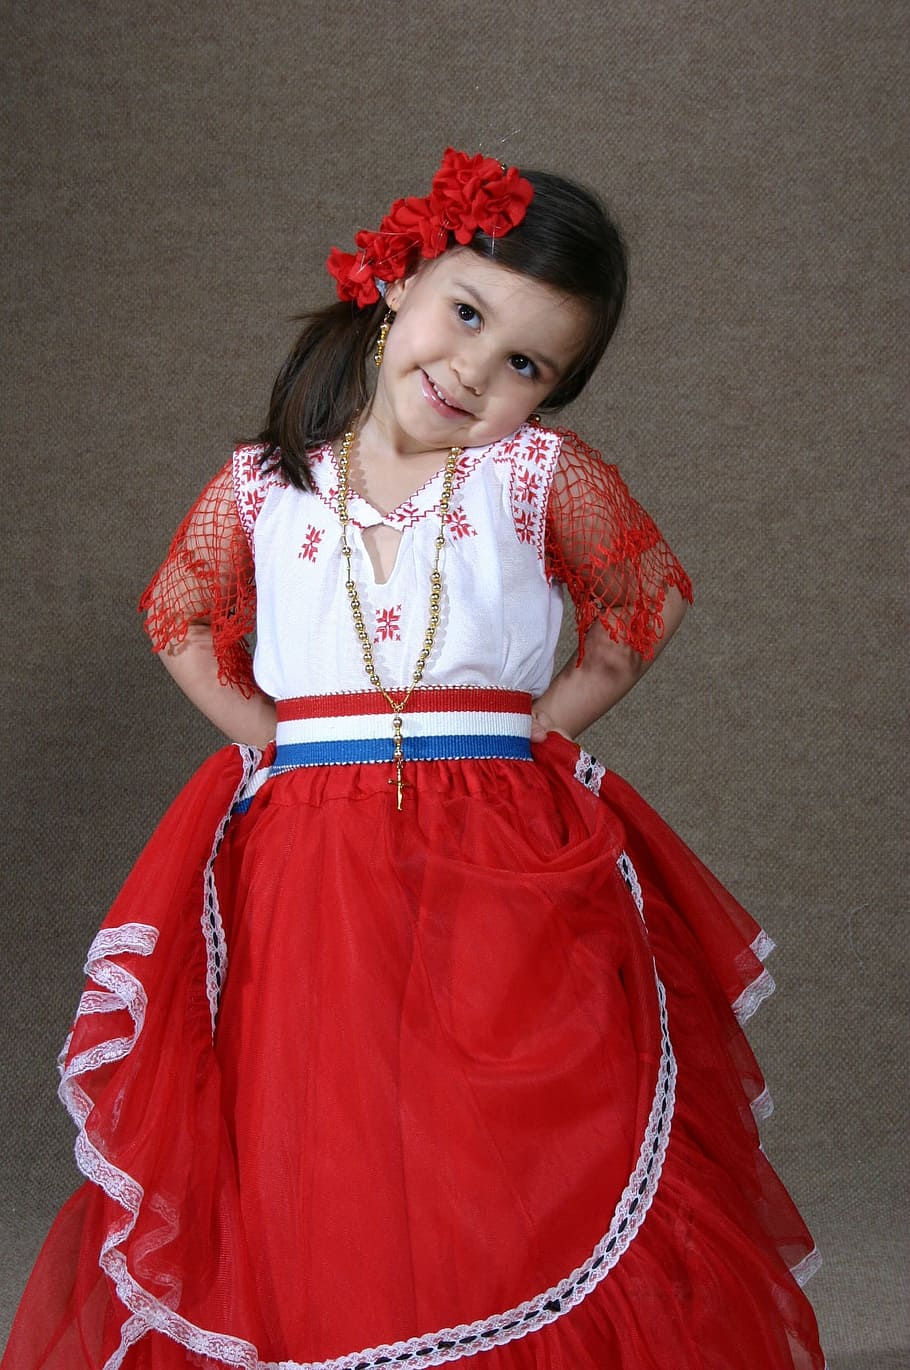 Childhood, Paraguay, Latin America, dress up, ostume, girl, skirt red, traditional, clothing, traditional Clothing